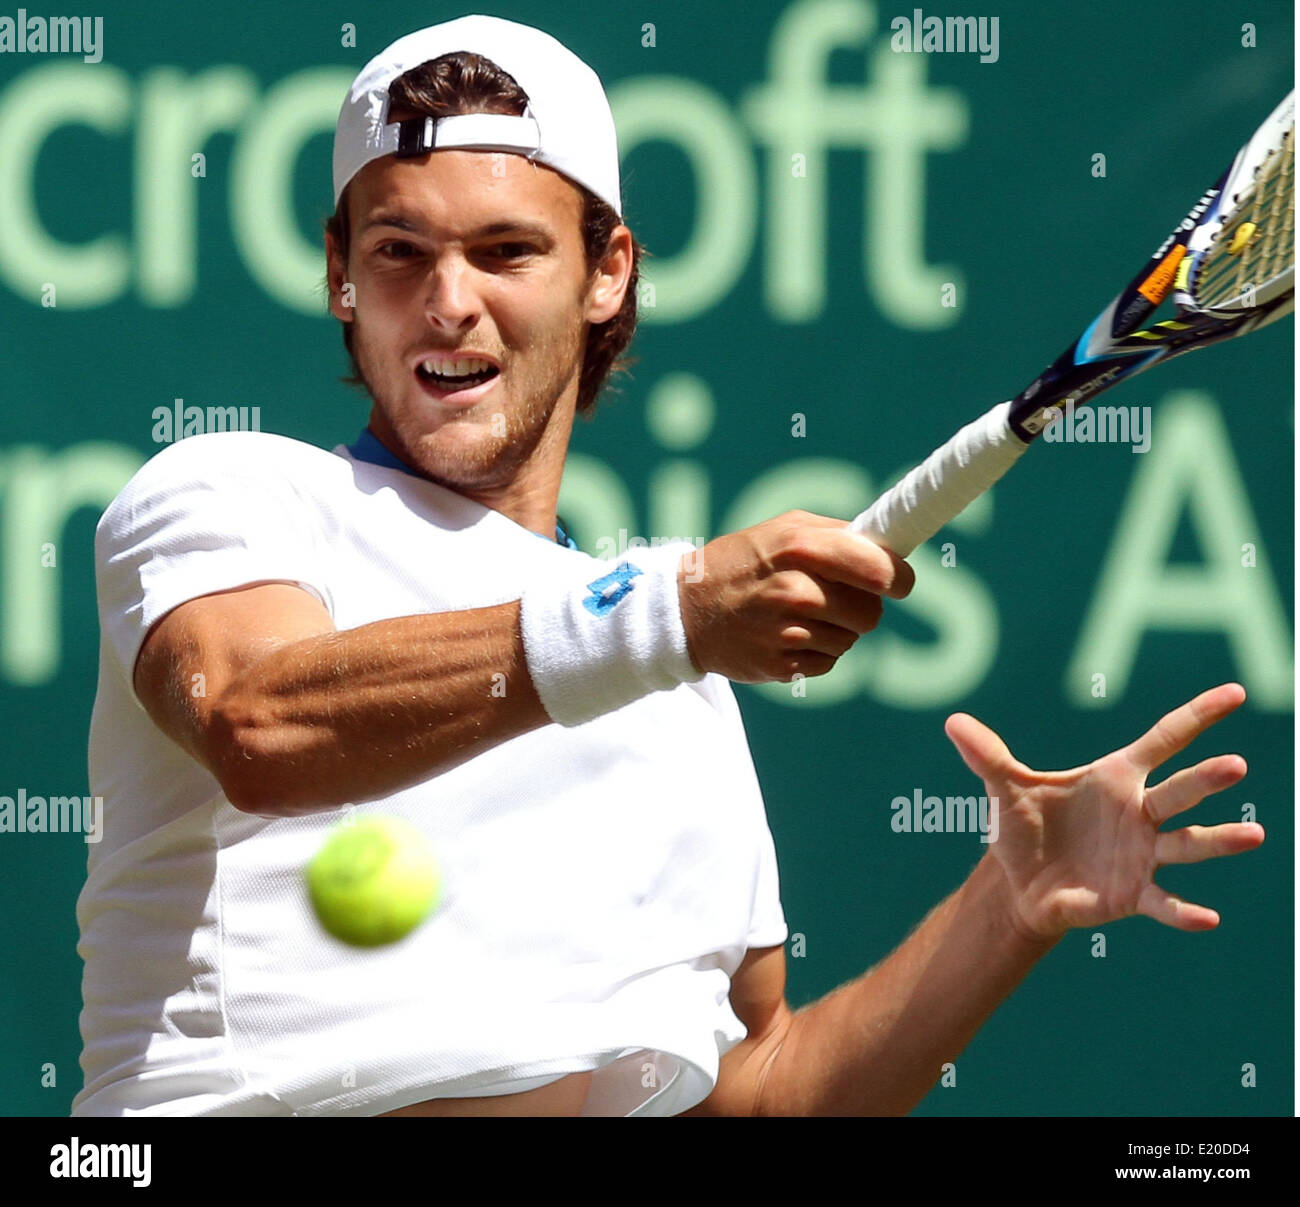 Halle (Westphalia), Germany, 12 June 2014. Portugal's Joao Sousa in action  against Switzerland's Roger Federer during the ATP tournament in Photo:  OLIVER KRATO/dpa/Alamy Live News Stock Photo - Alamy